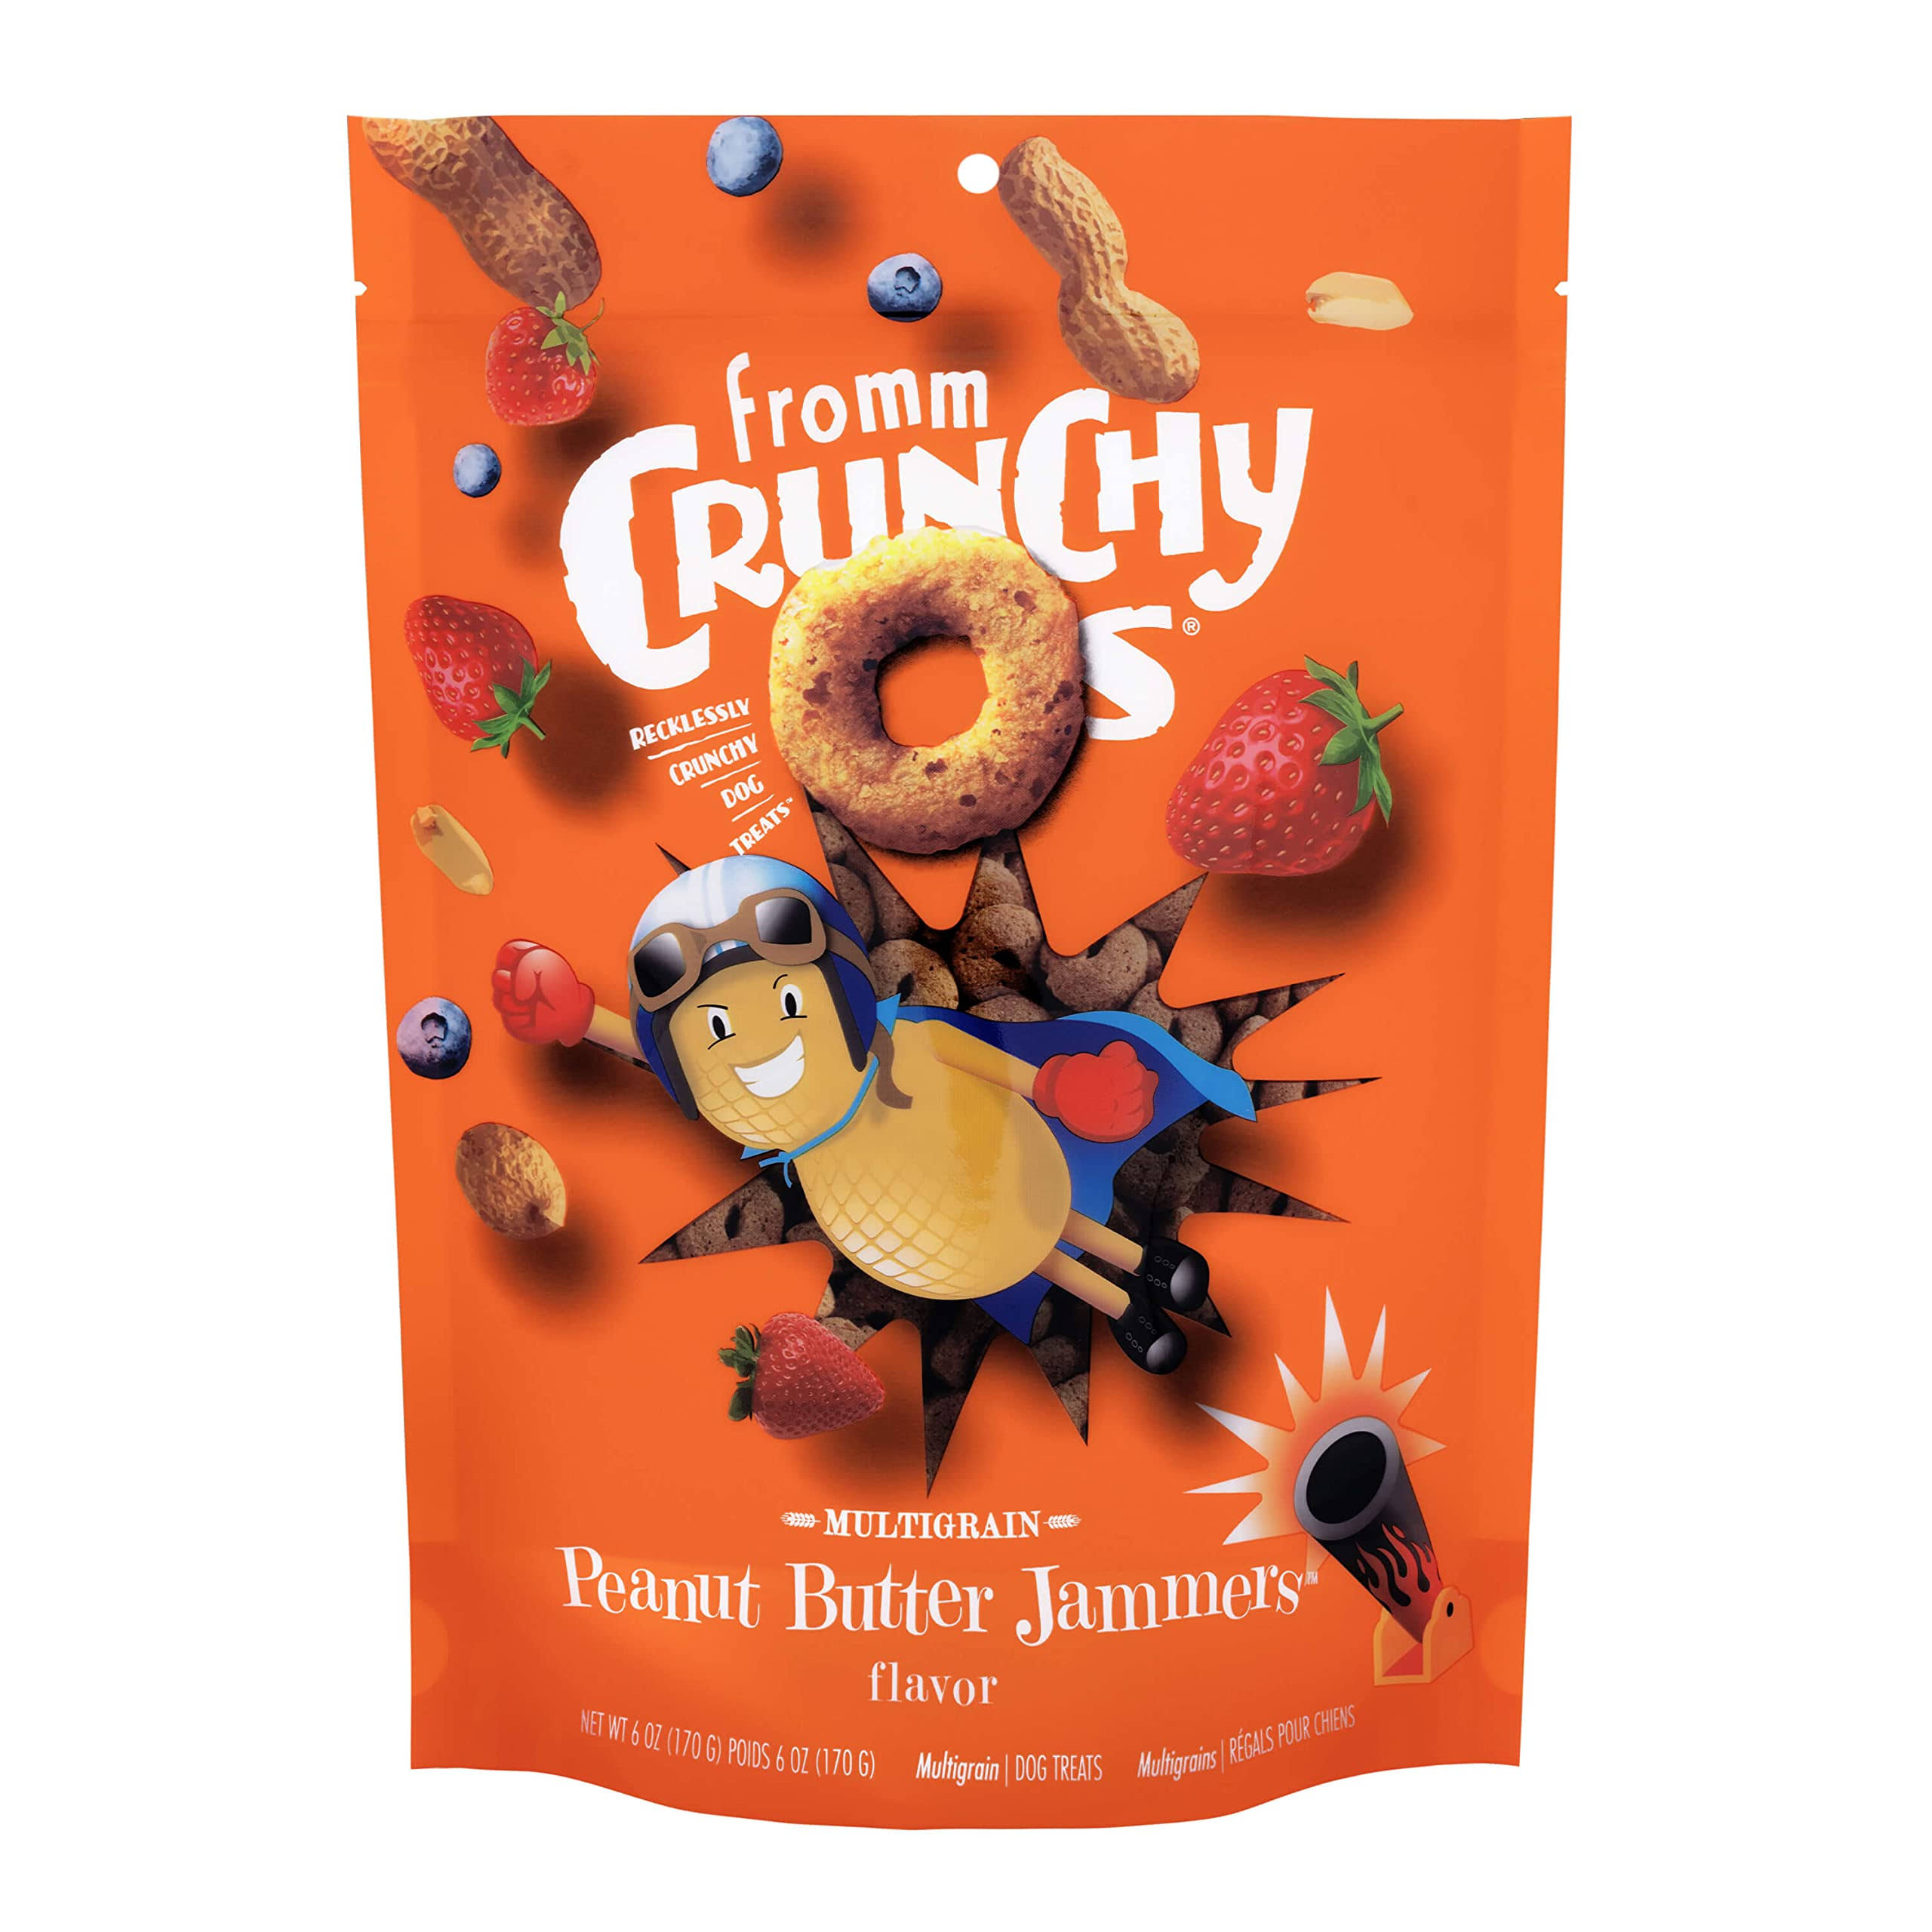 Fromm Crunchy O's Peanut Butter Jammers 6 Oz